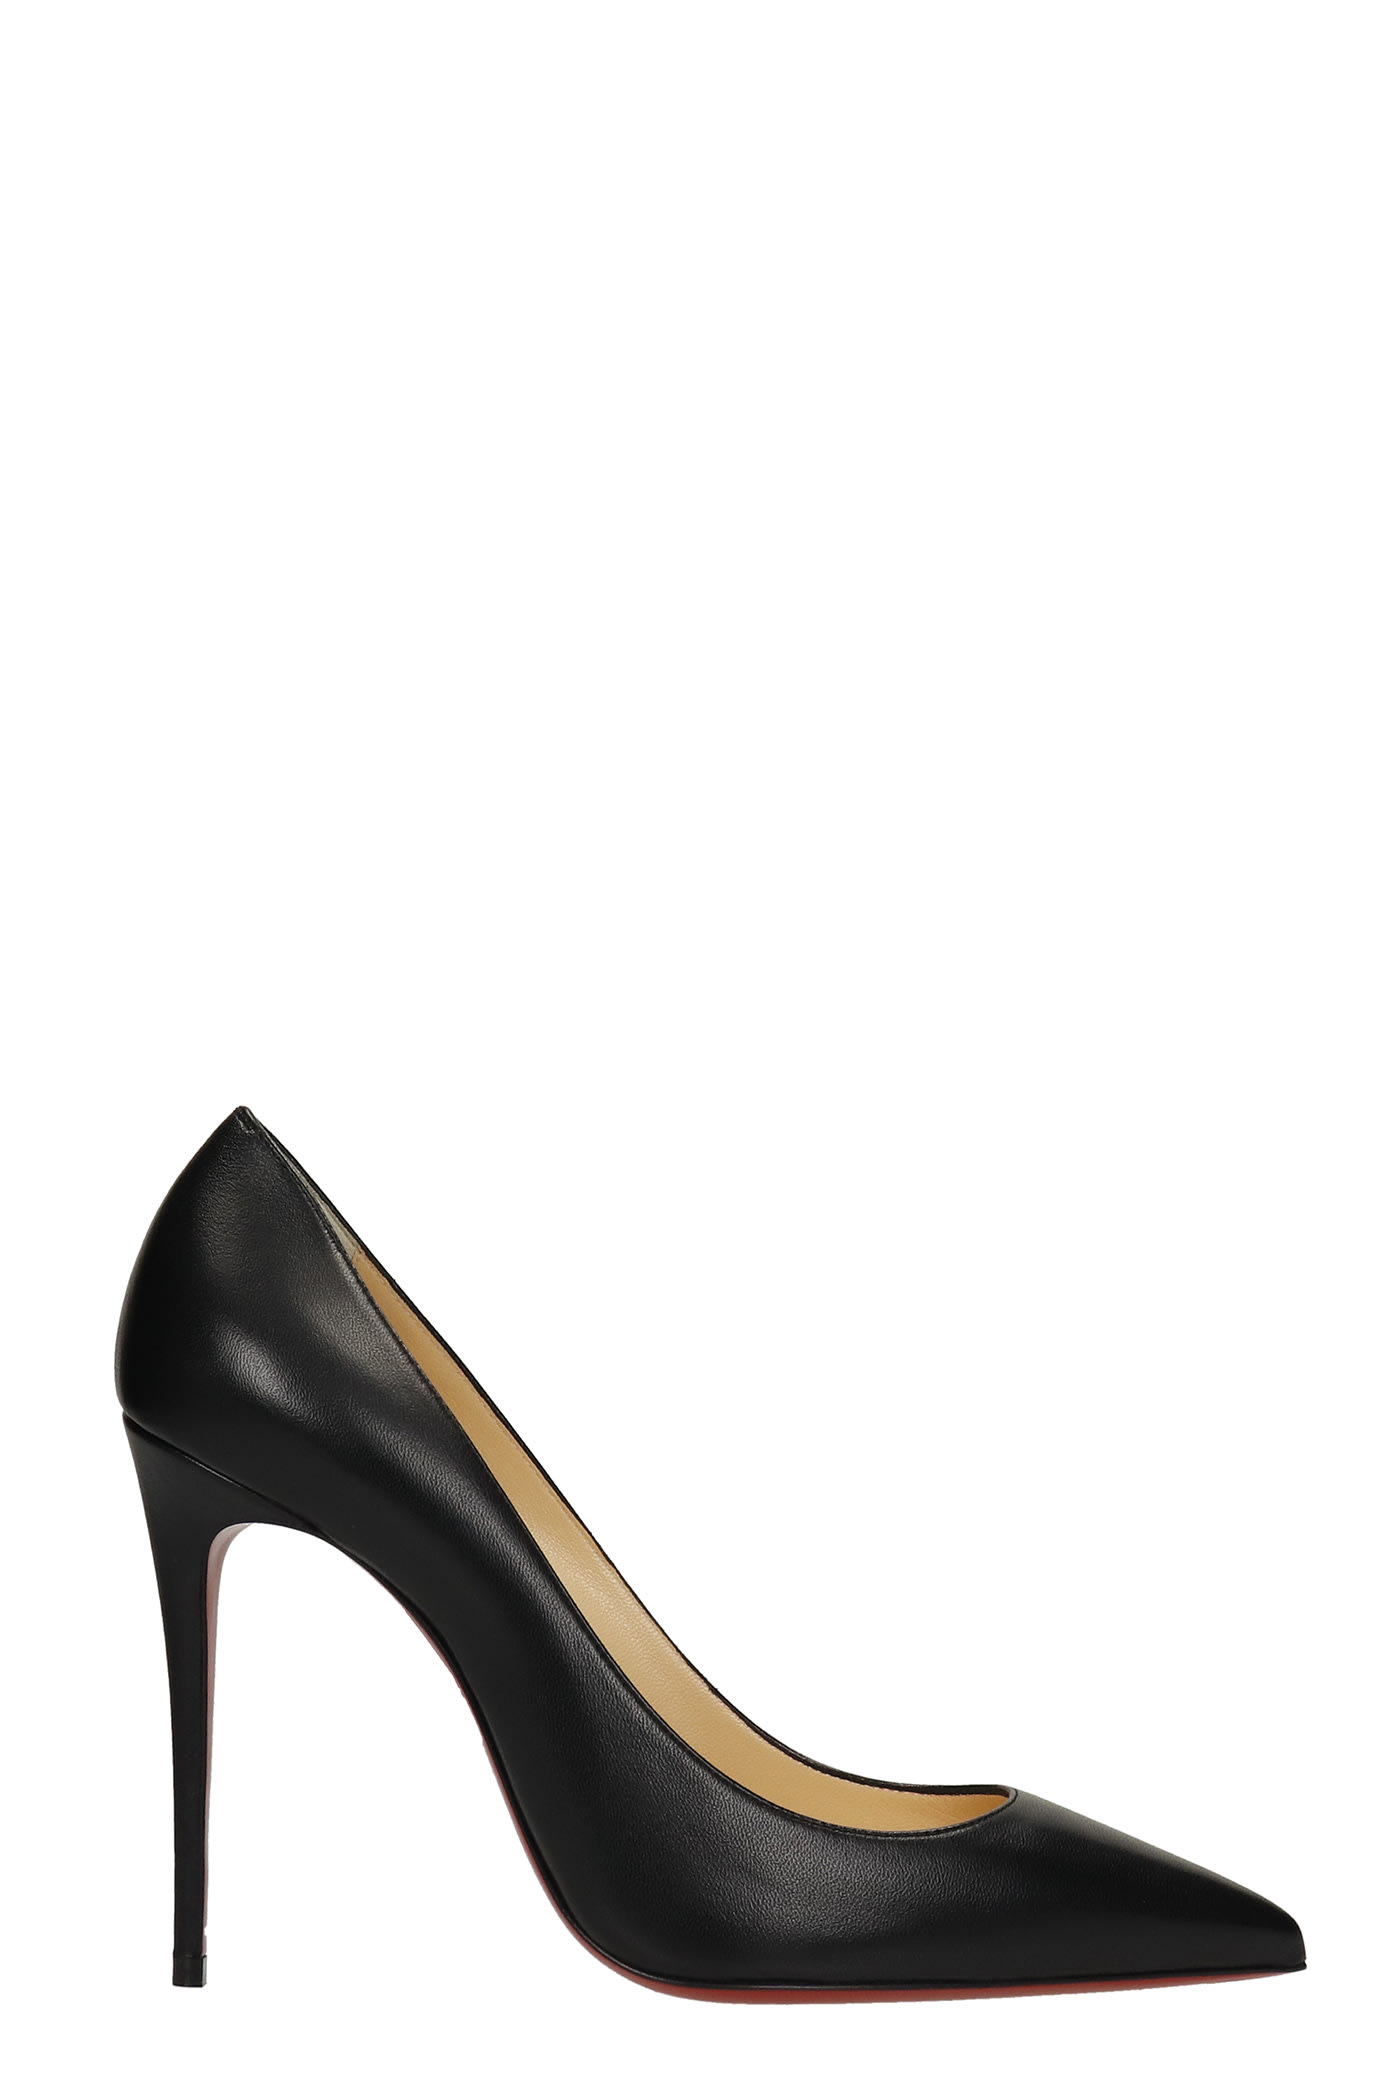 Christian Louboutin Kate 100 Pumps In Black Leather